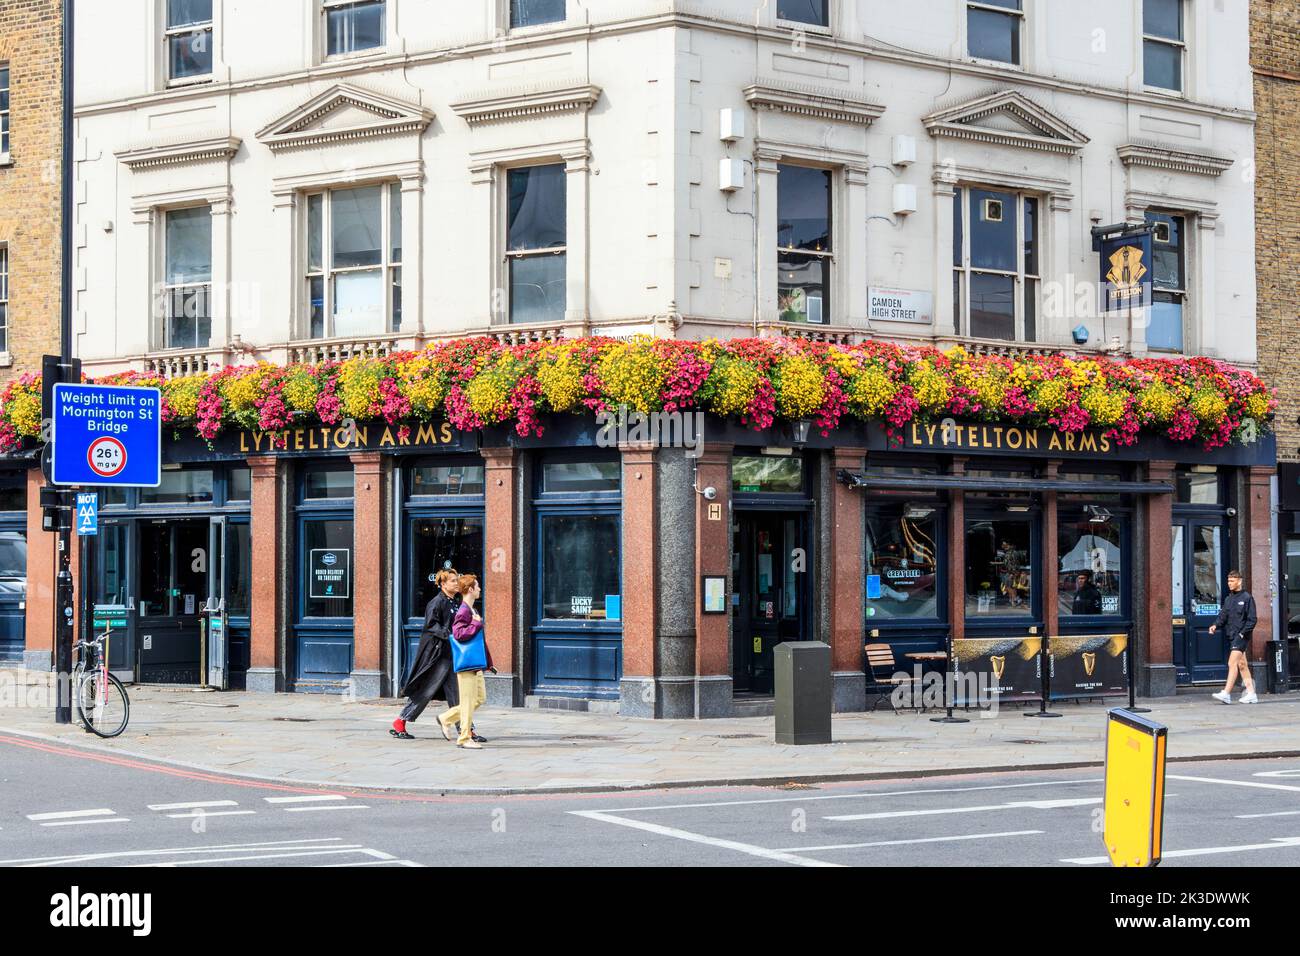 The Lyttelton Arms pub opposite Mornington Crescent station, made famous by the BBC comedy show 'I'm Sorry I haven't a Clue', London, UK Stock Photo